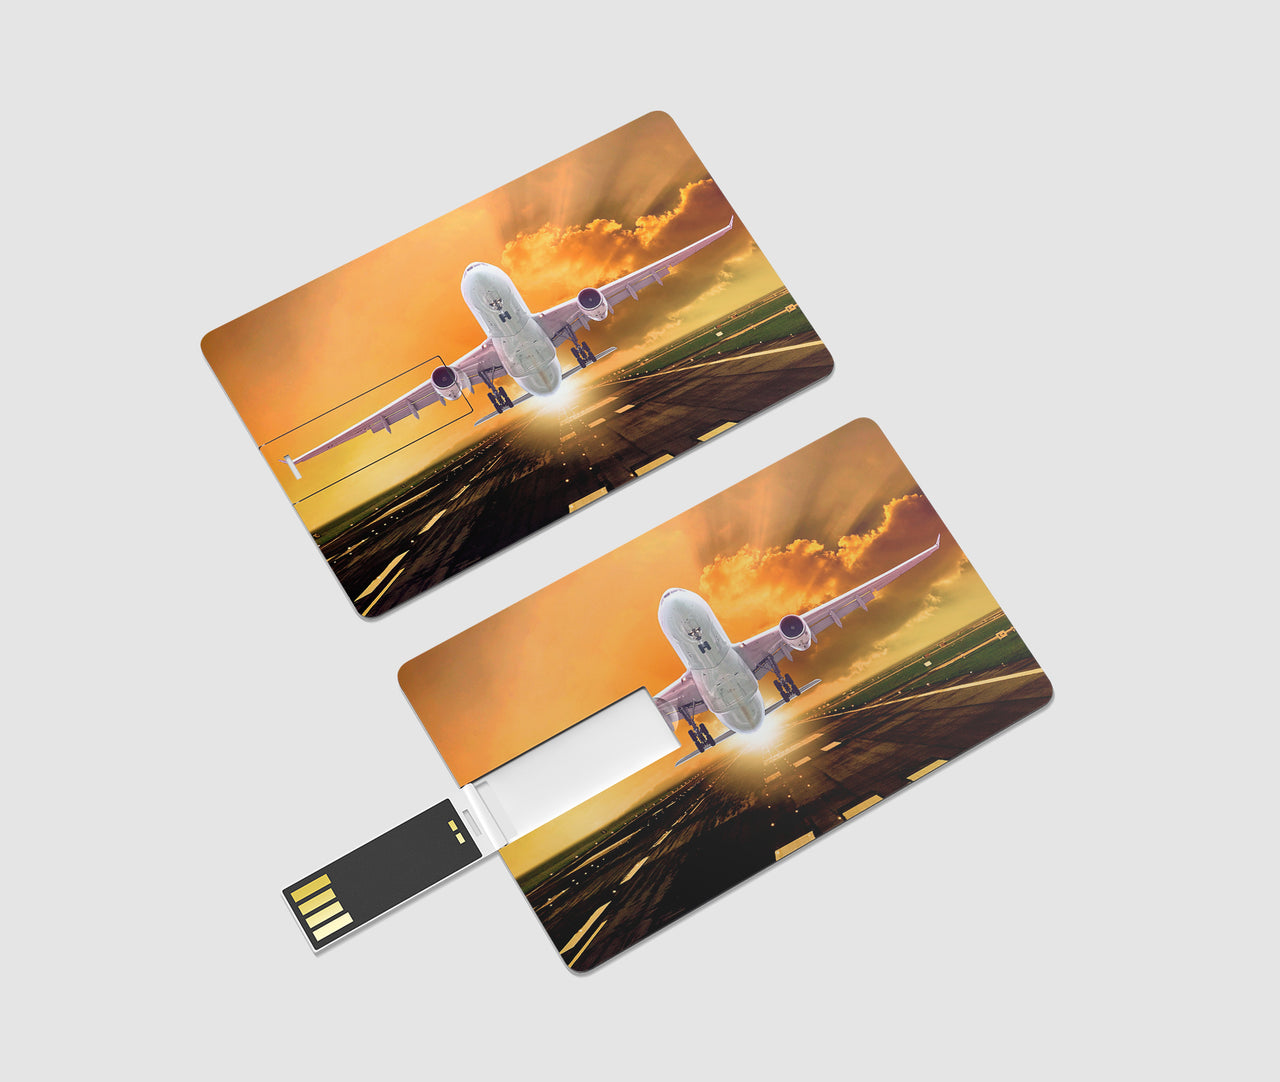 Amazing Departing Aircraft Sunset & Clouds Behind Designed USB Cards